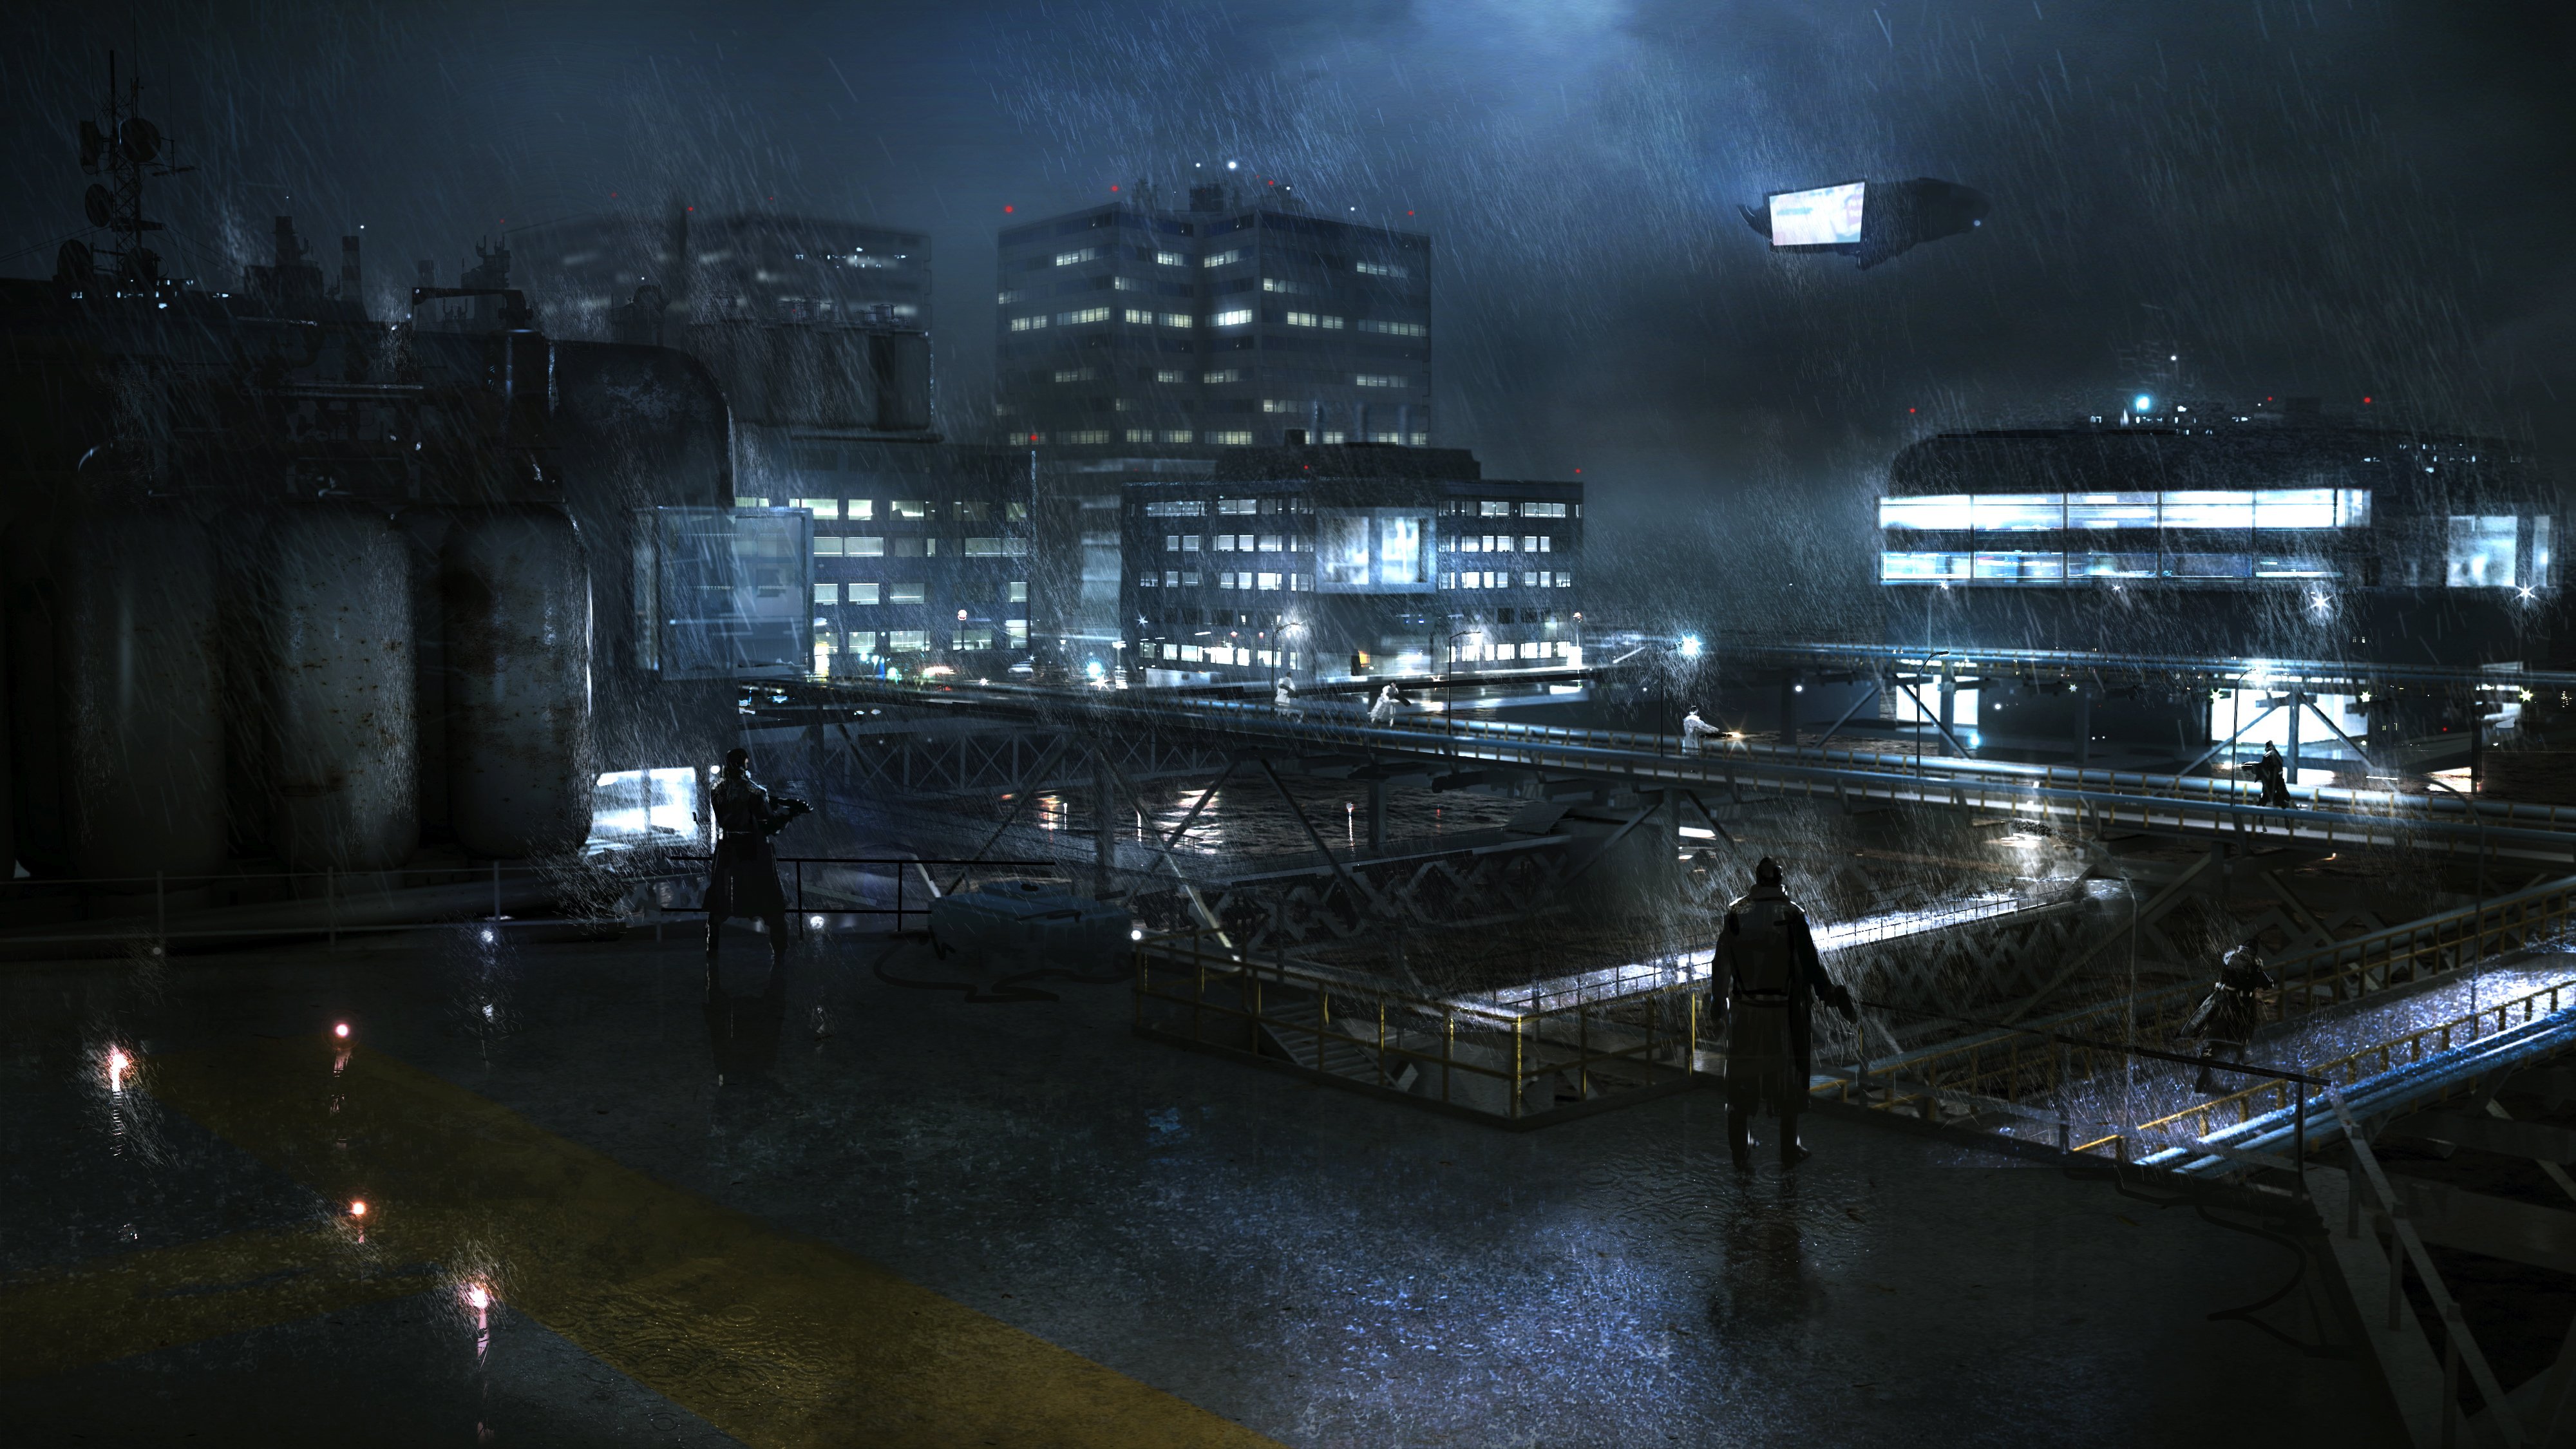 syndicate, Cyberpunk, Shooter, Sci fi, Action, Fighting, Crime, Spy, Tactical Wallpaper